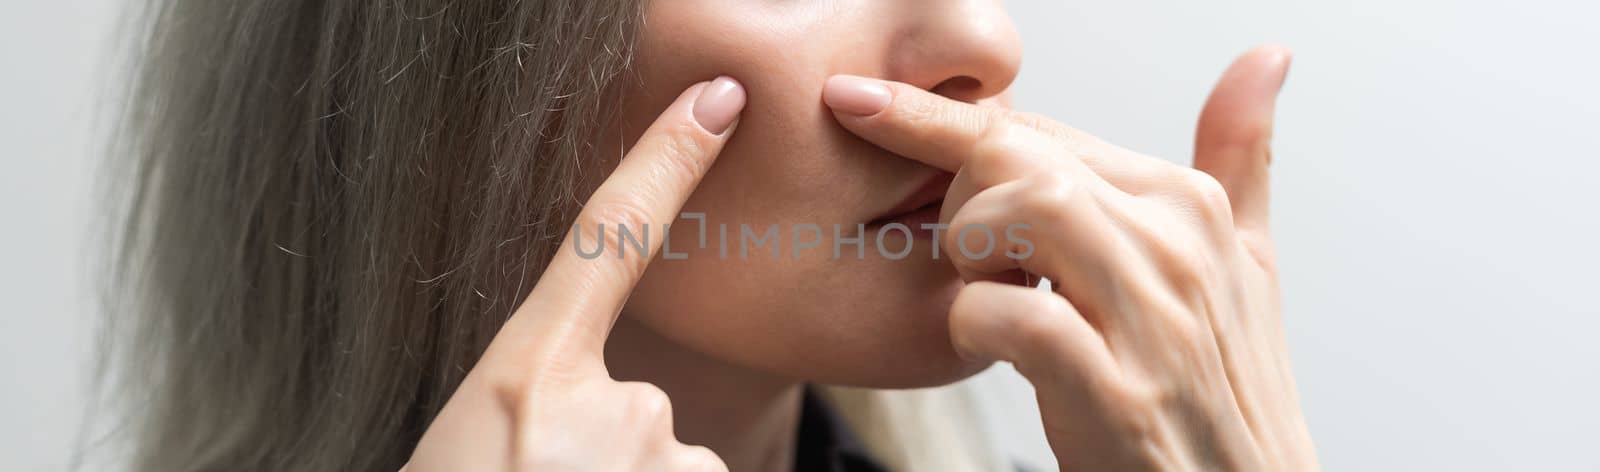 young woman squeezing pimples on the face by Andelov13